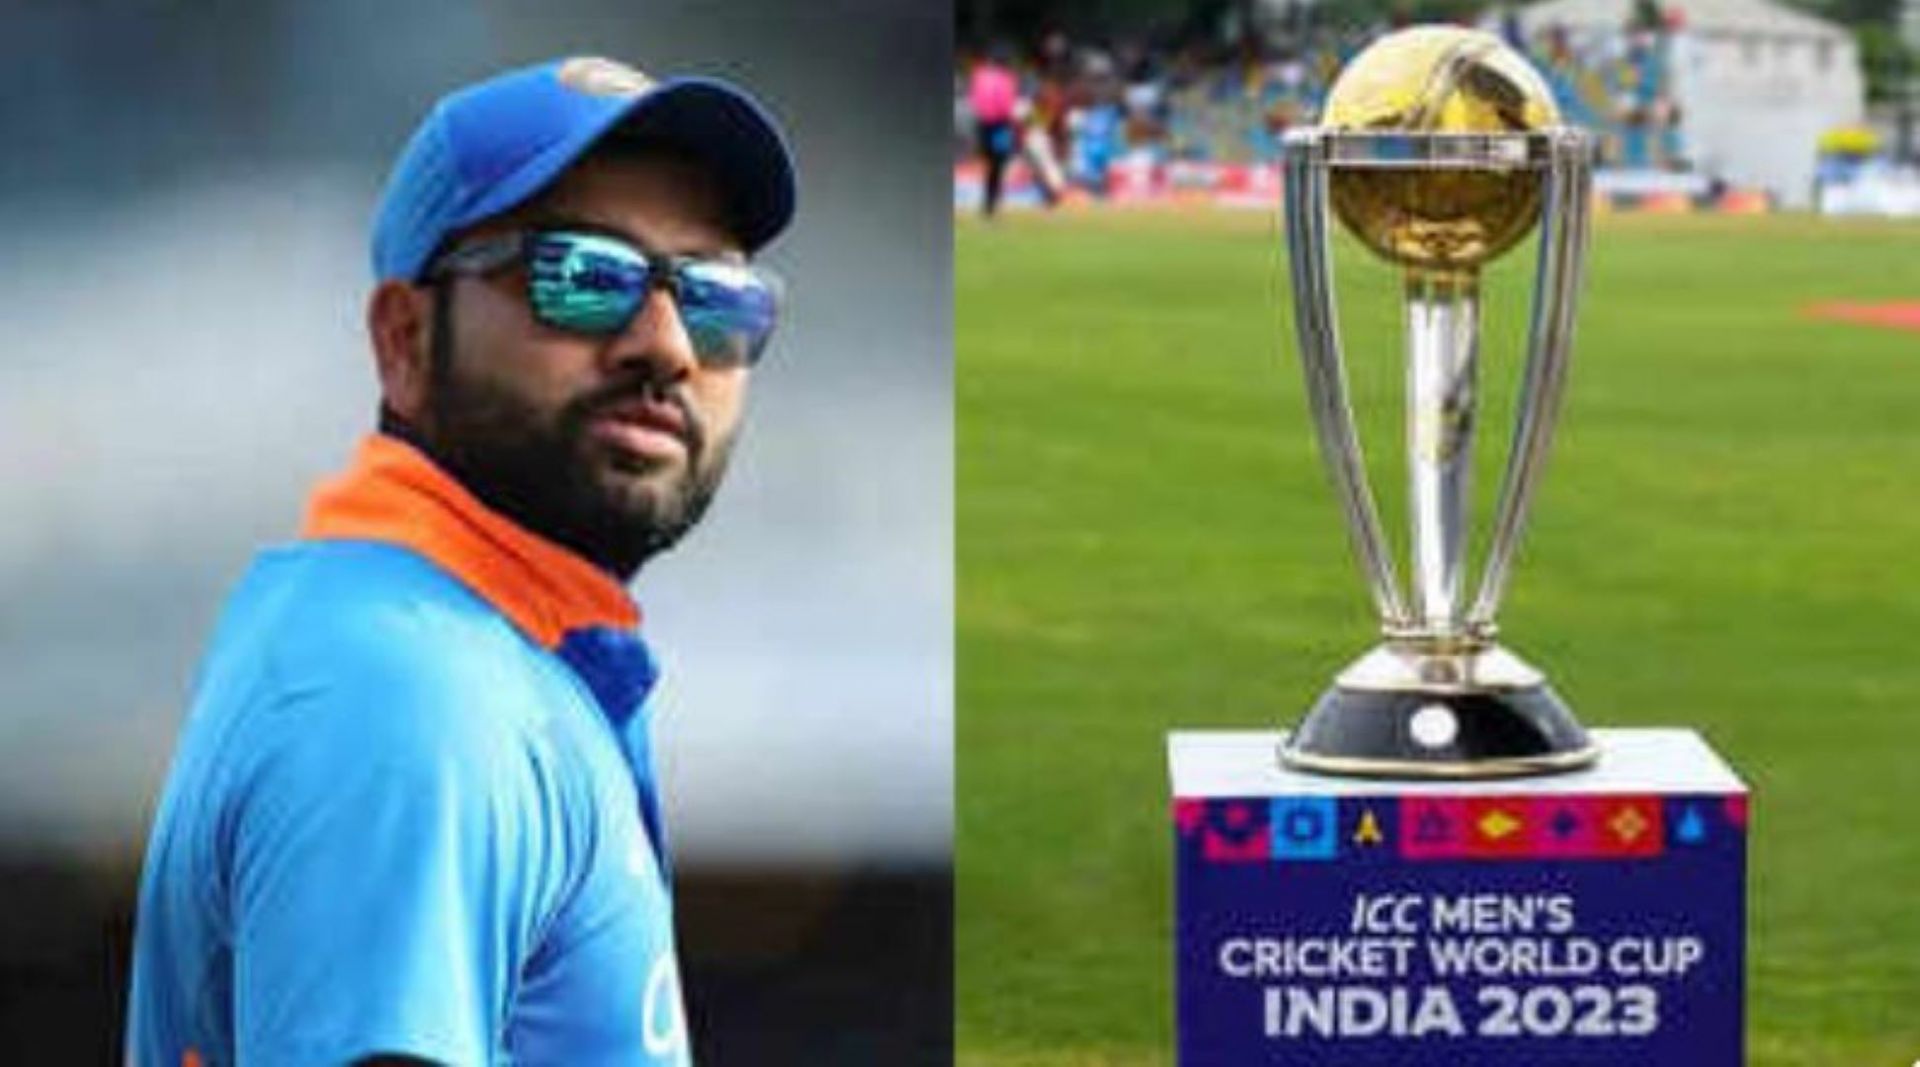 India will hope their dominance of World Cricket can carry over to the World Cup.